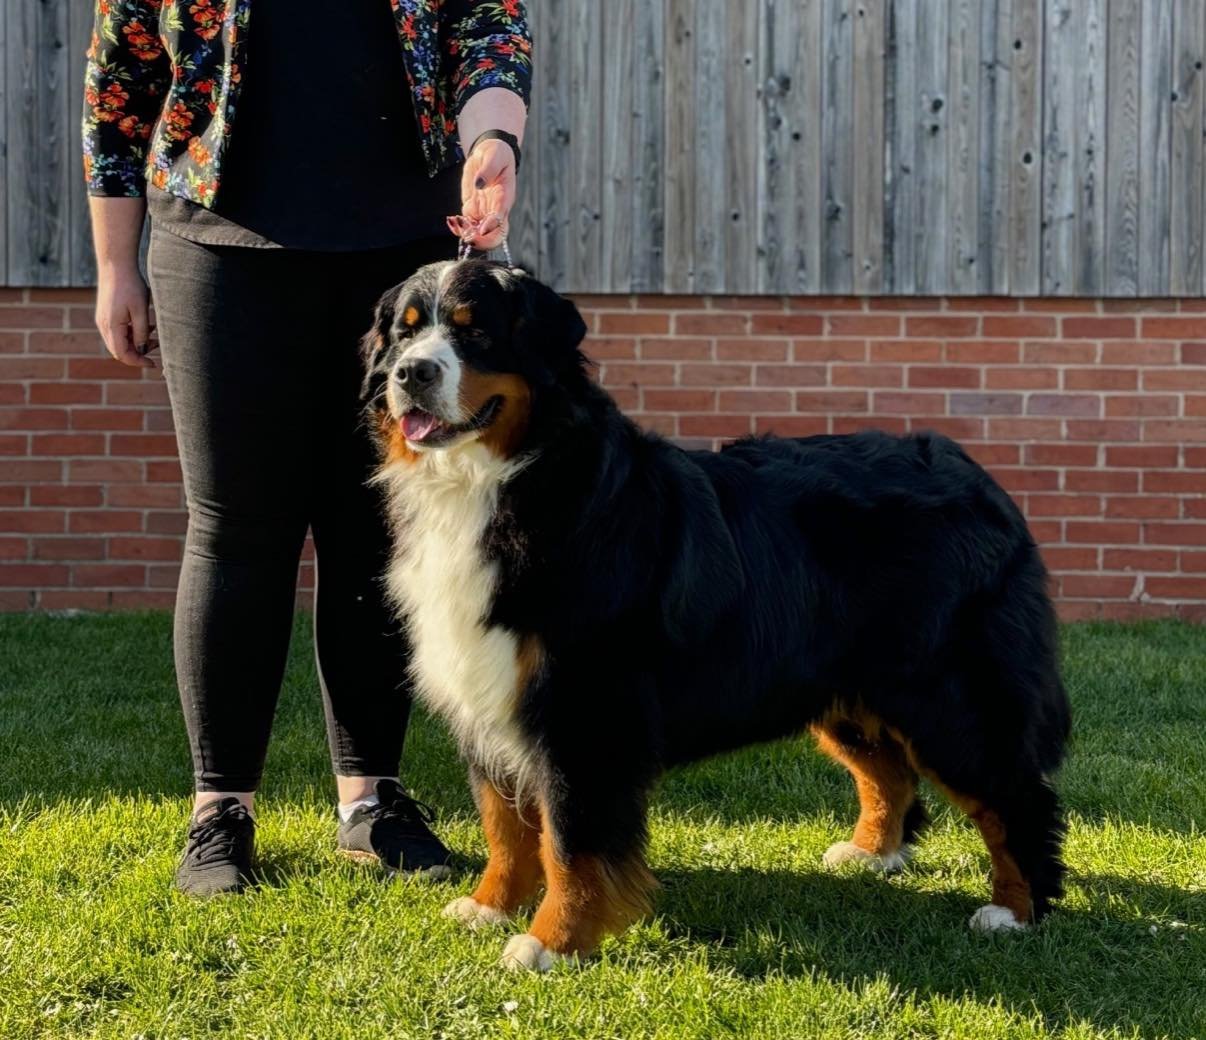 NORA &lsquo;CH Waldershelf Can&rsquo;t Ignora JW&rsquo; wins 🏆 BEST IN SHOW 🏆 under breed specialist judge Julie Baldwin at the Northern Bernese Mountain Dog Club Championship Show. 
So so proud of our special girl 💜

It&rsquo;s always lovely to s